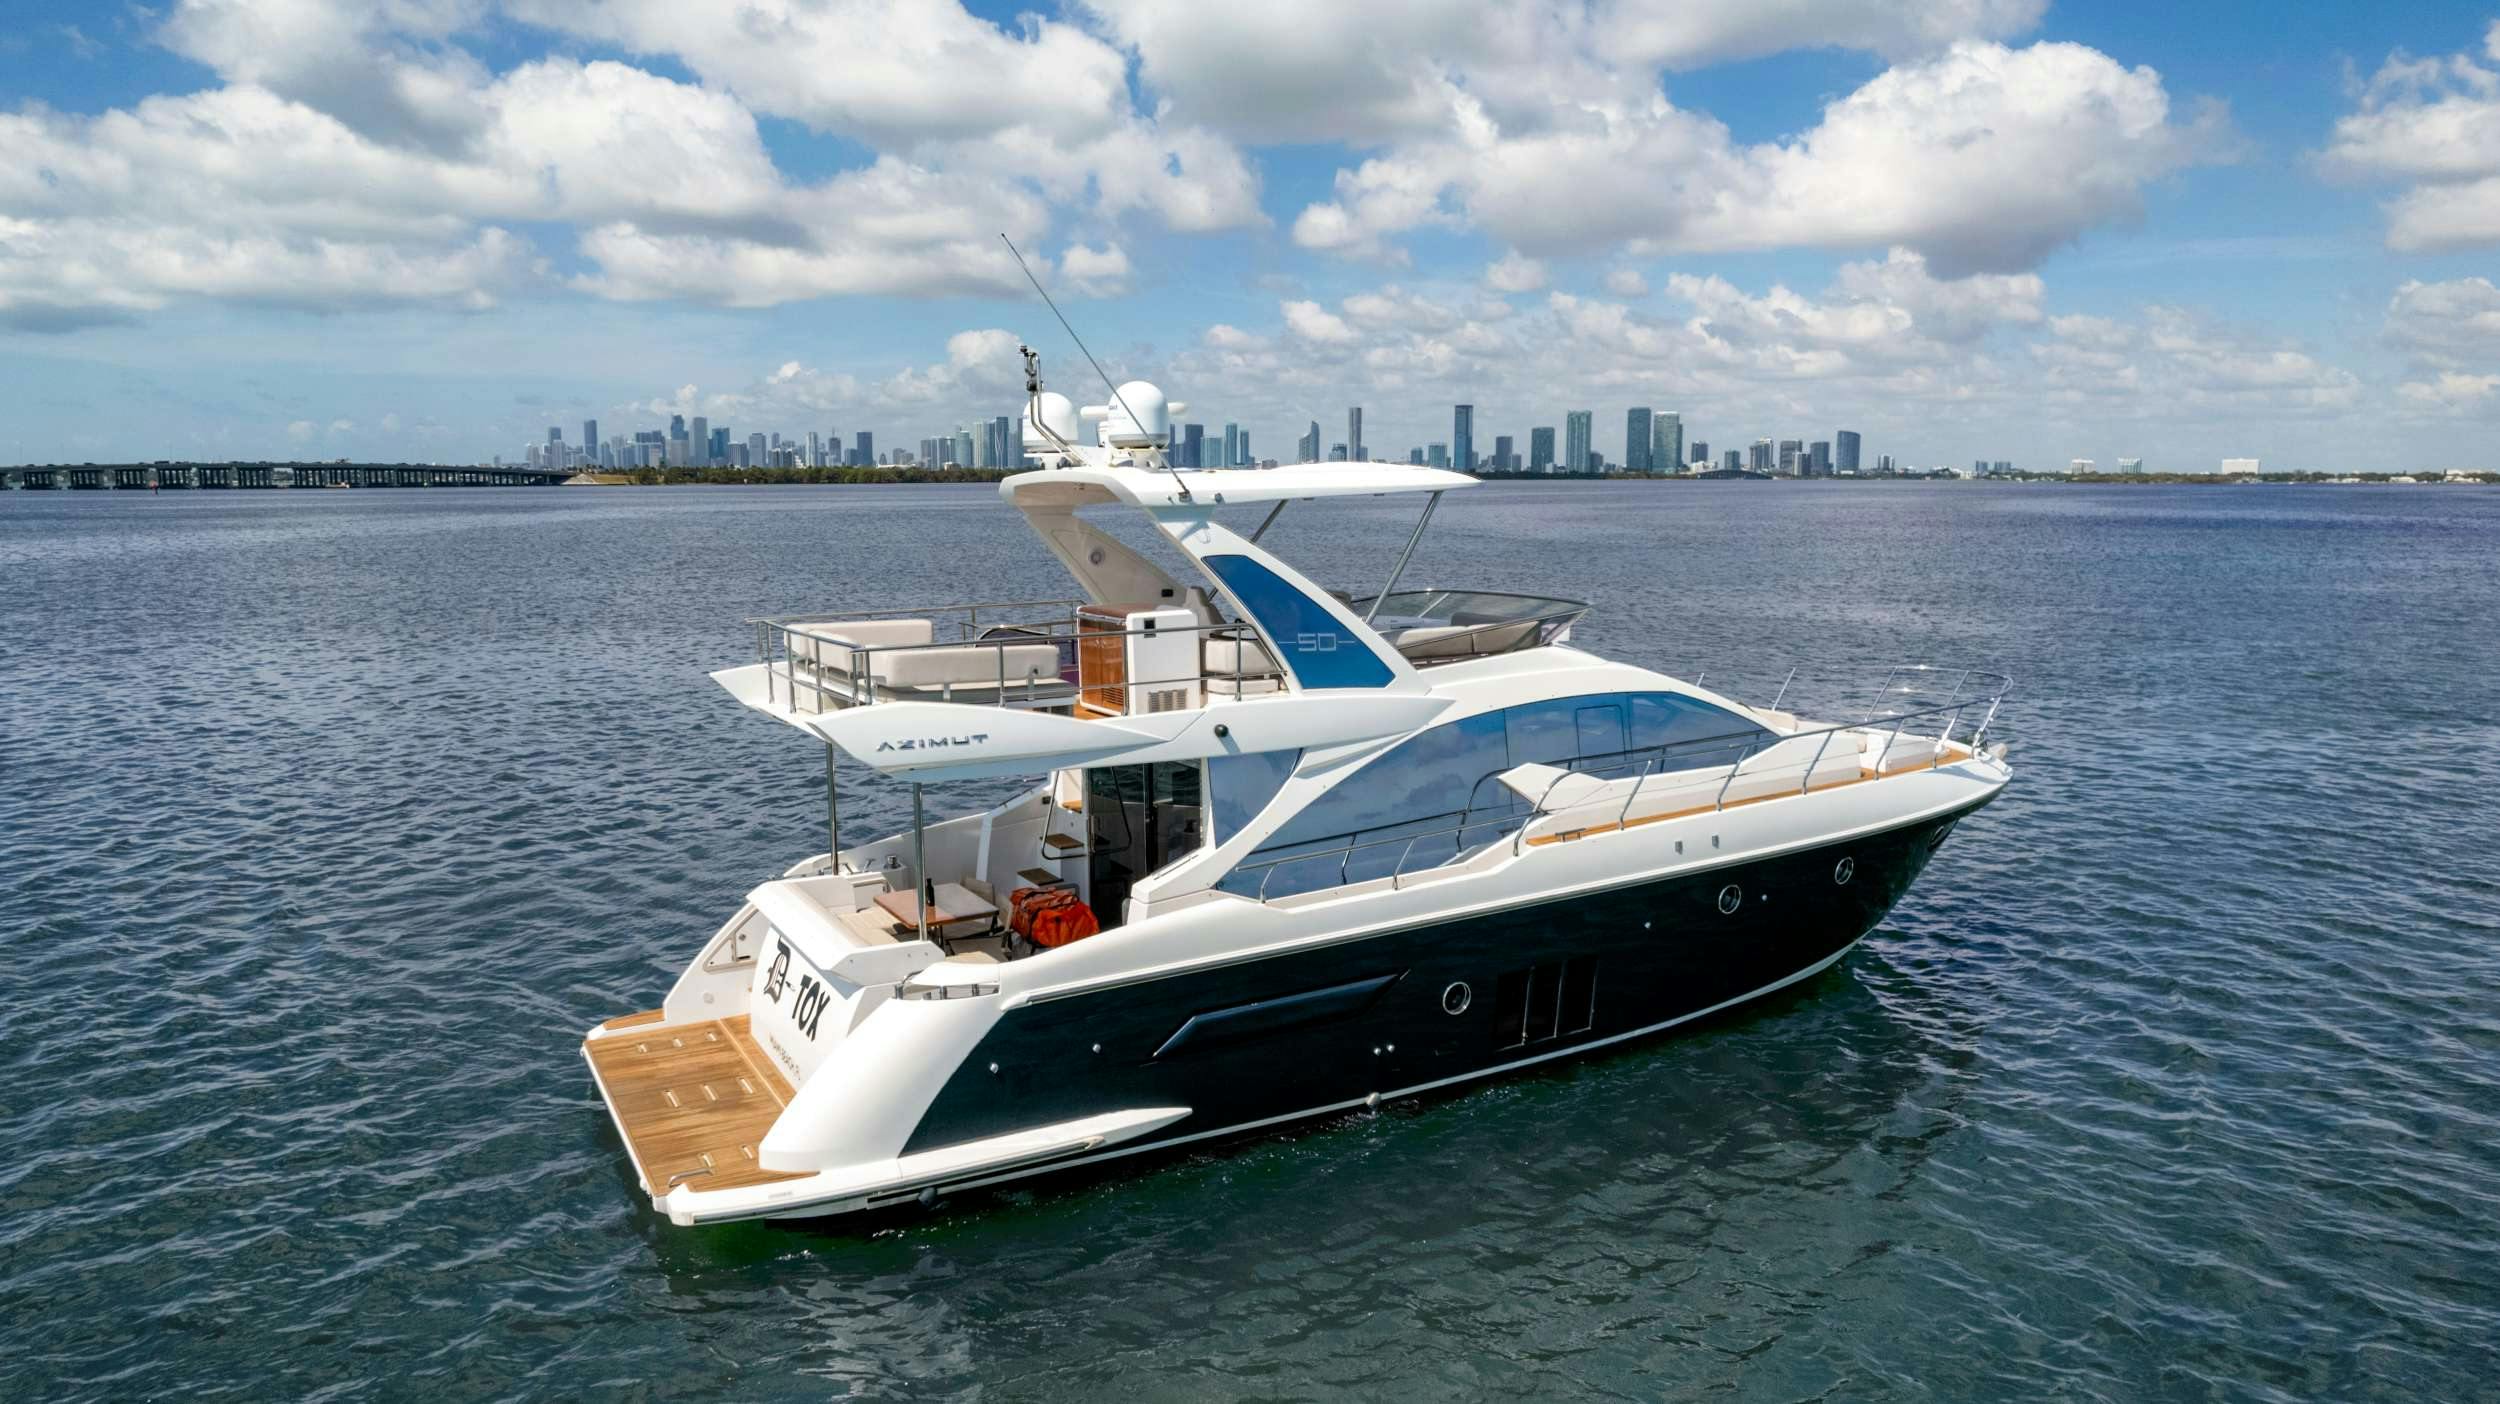 D-Tox - Motor Boat Charter USA & Boat hire in Florida 1